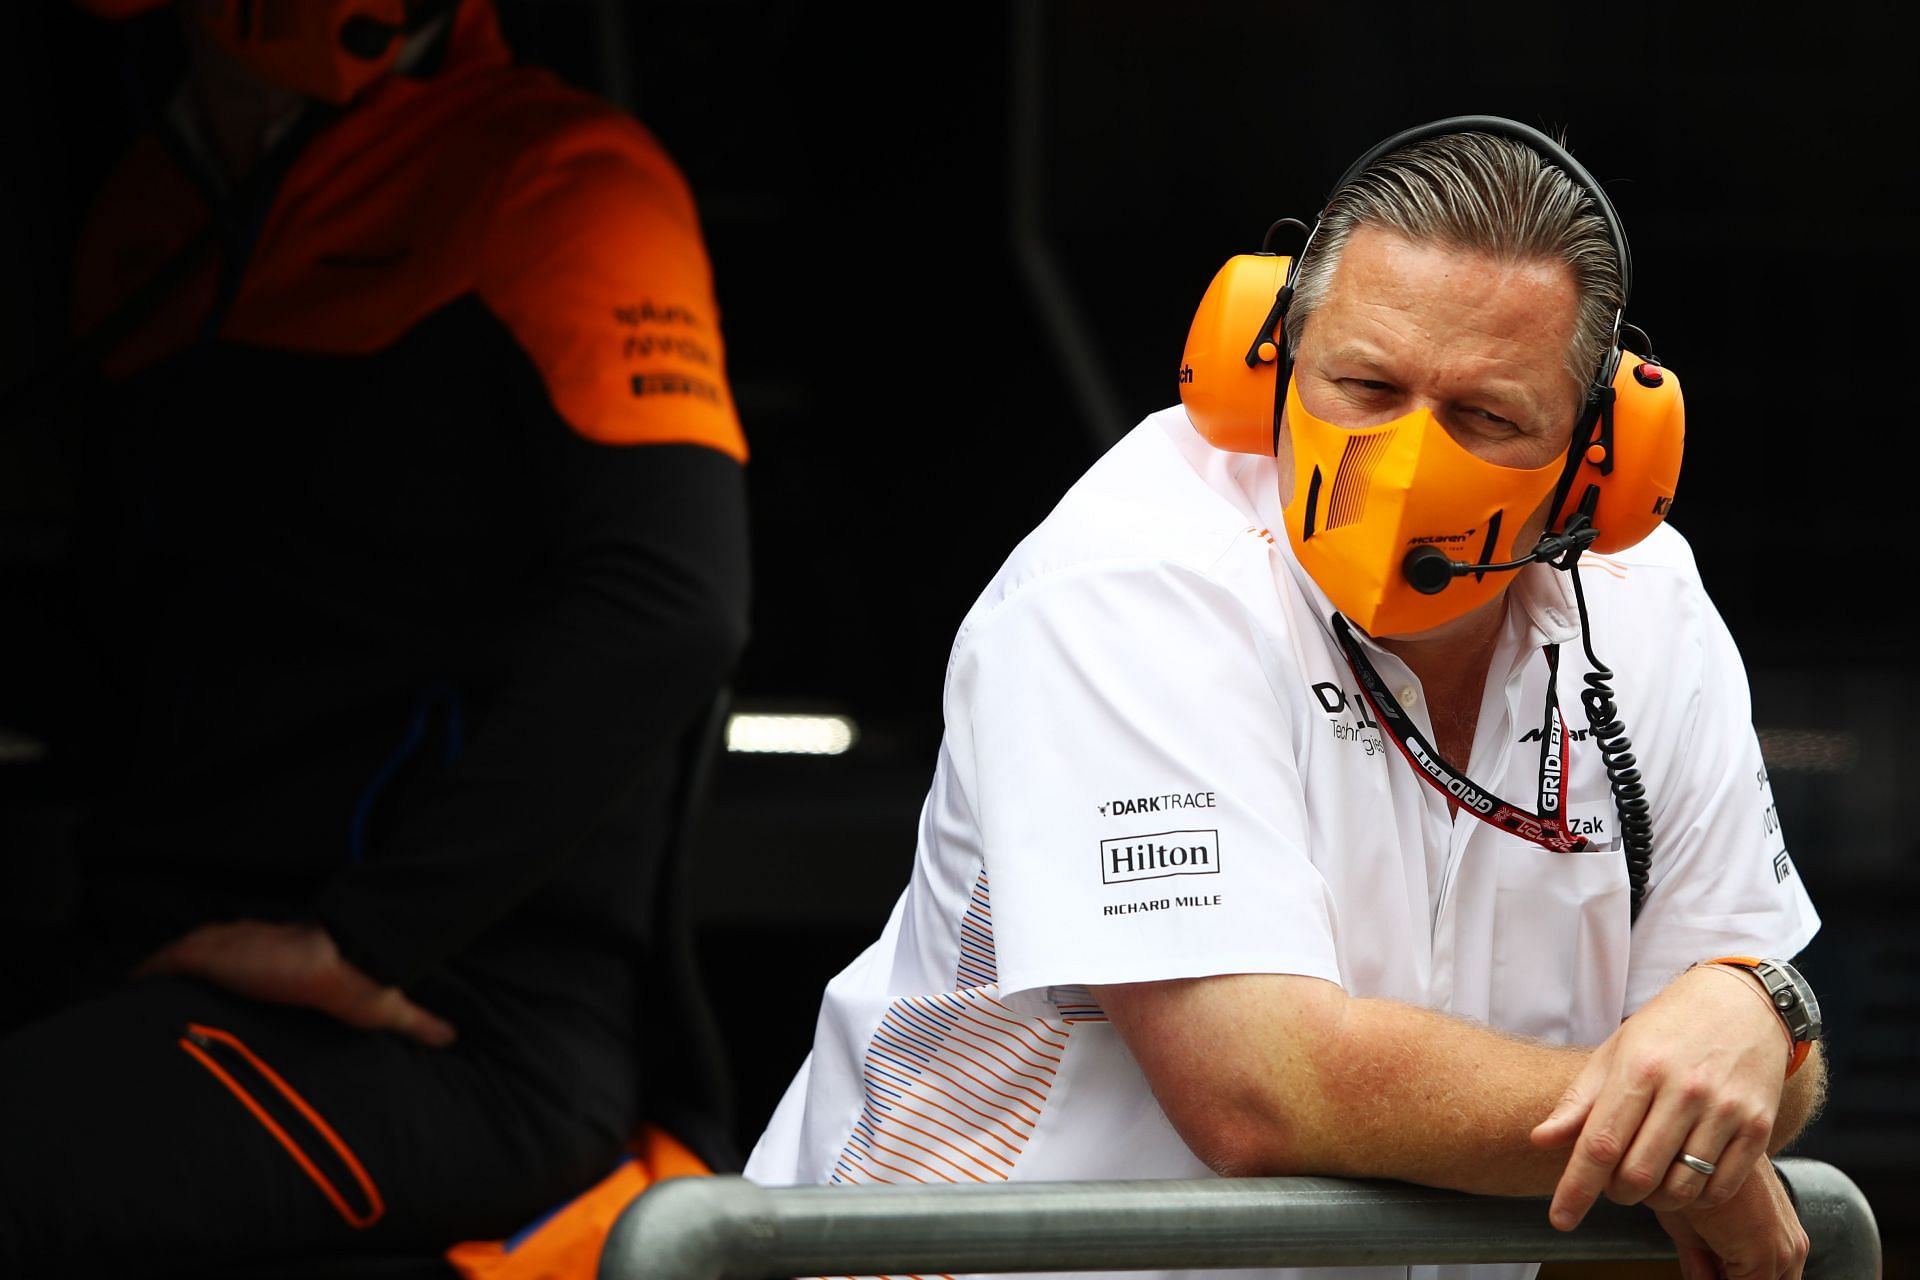 McLaren team principal Zak Brown is hopeful of an insightful investigation into what happened in Abu Dhabi